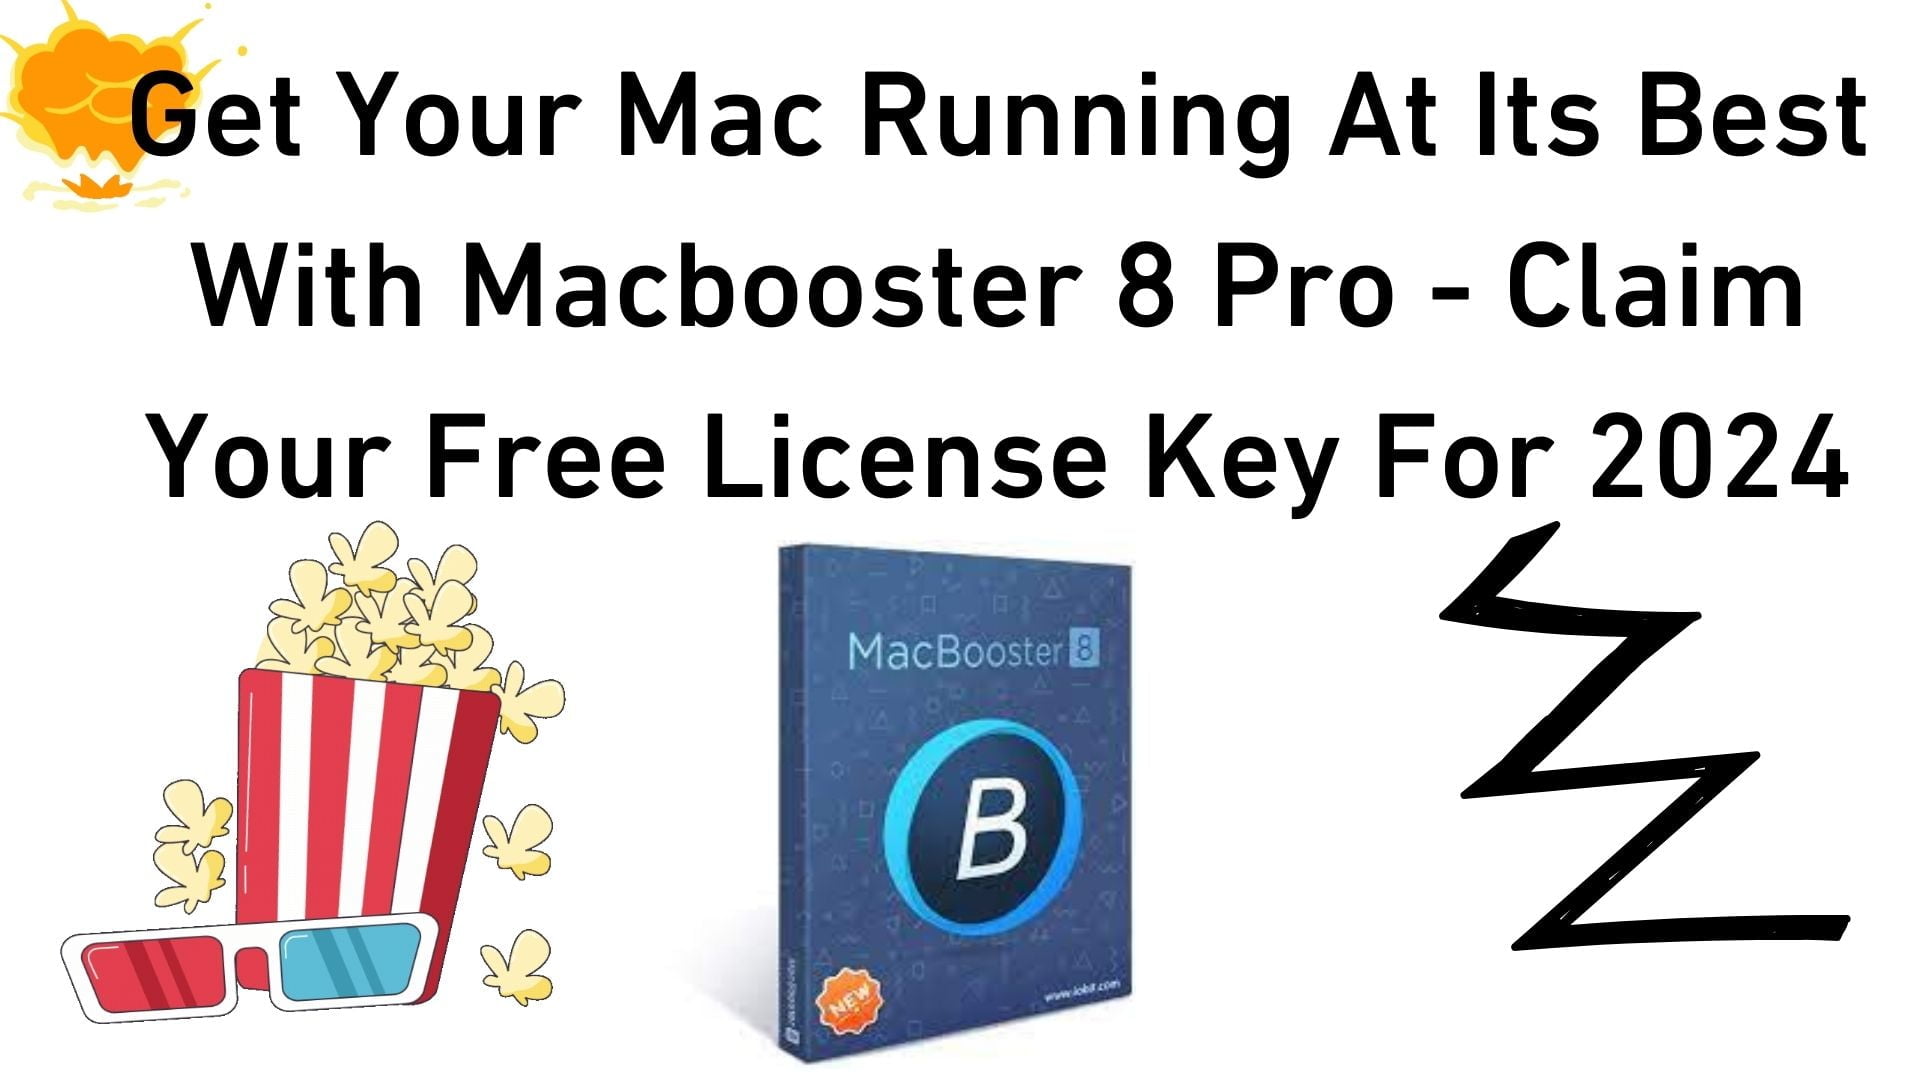 Get Your Mac Running At Its Best With Macbooster 8 Pro - Claim Your Free License Key For 2024